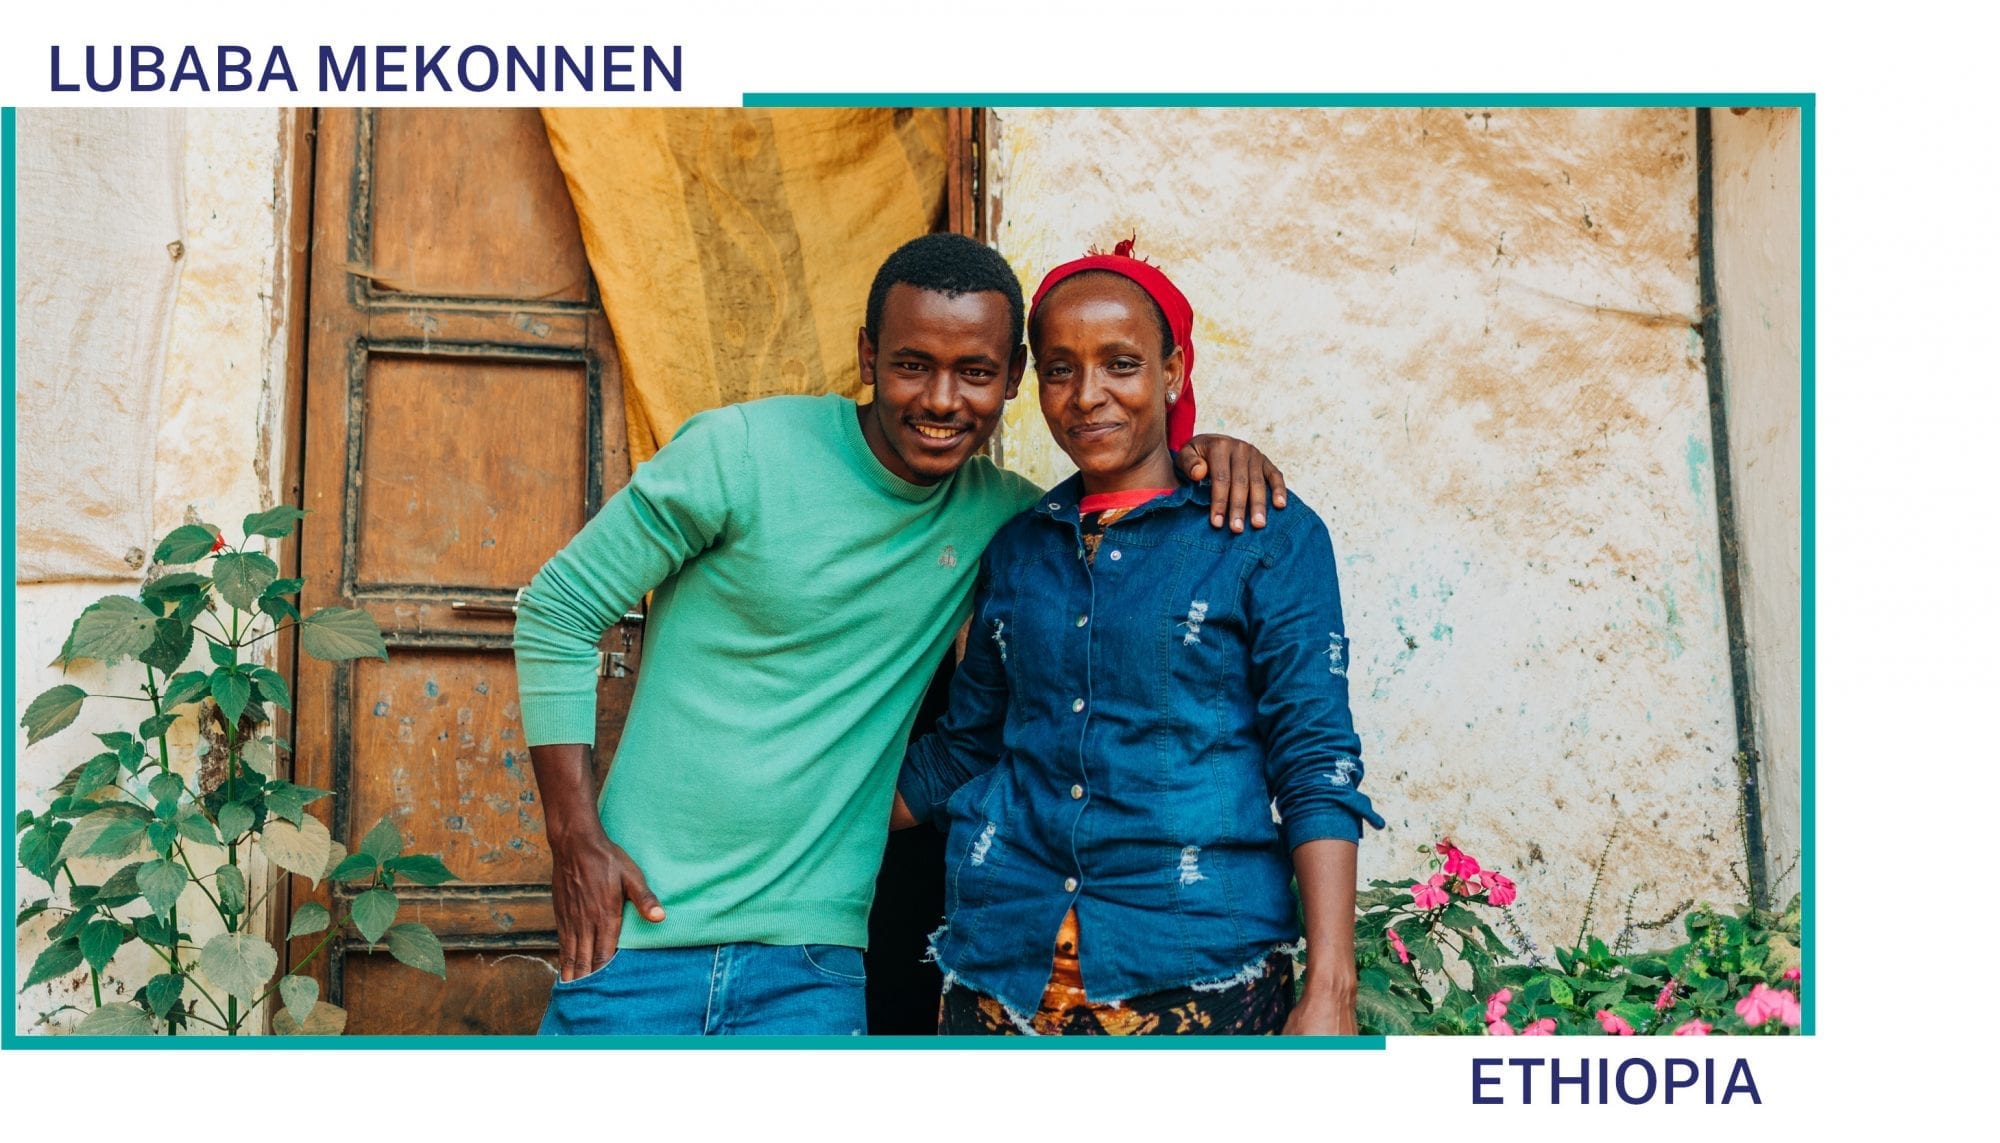 Lubaba Mekonnen stands with her son in front of their house in Ethiopia